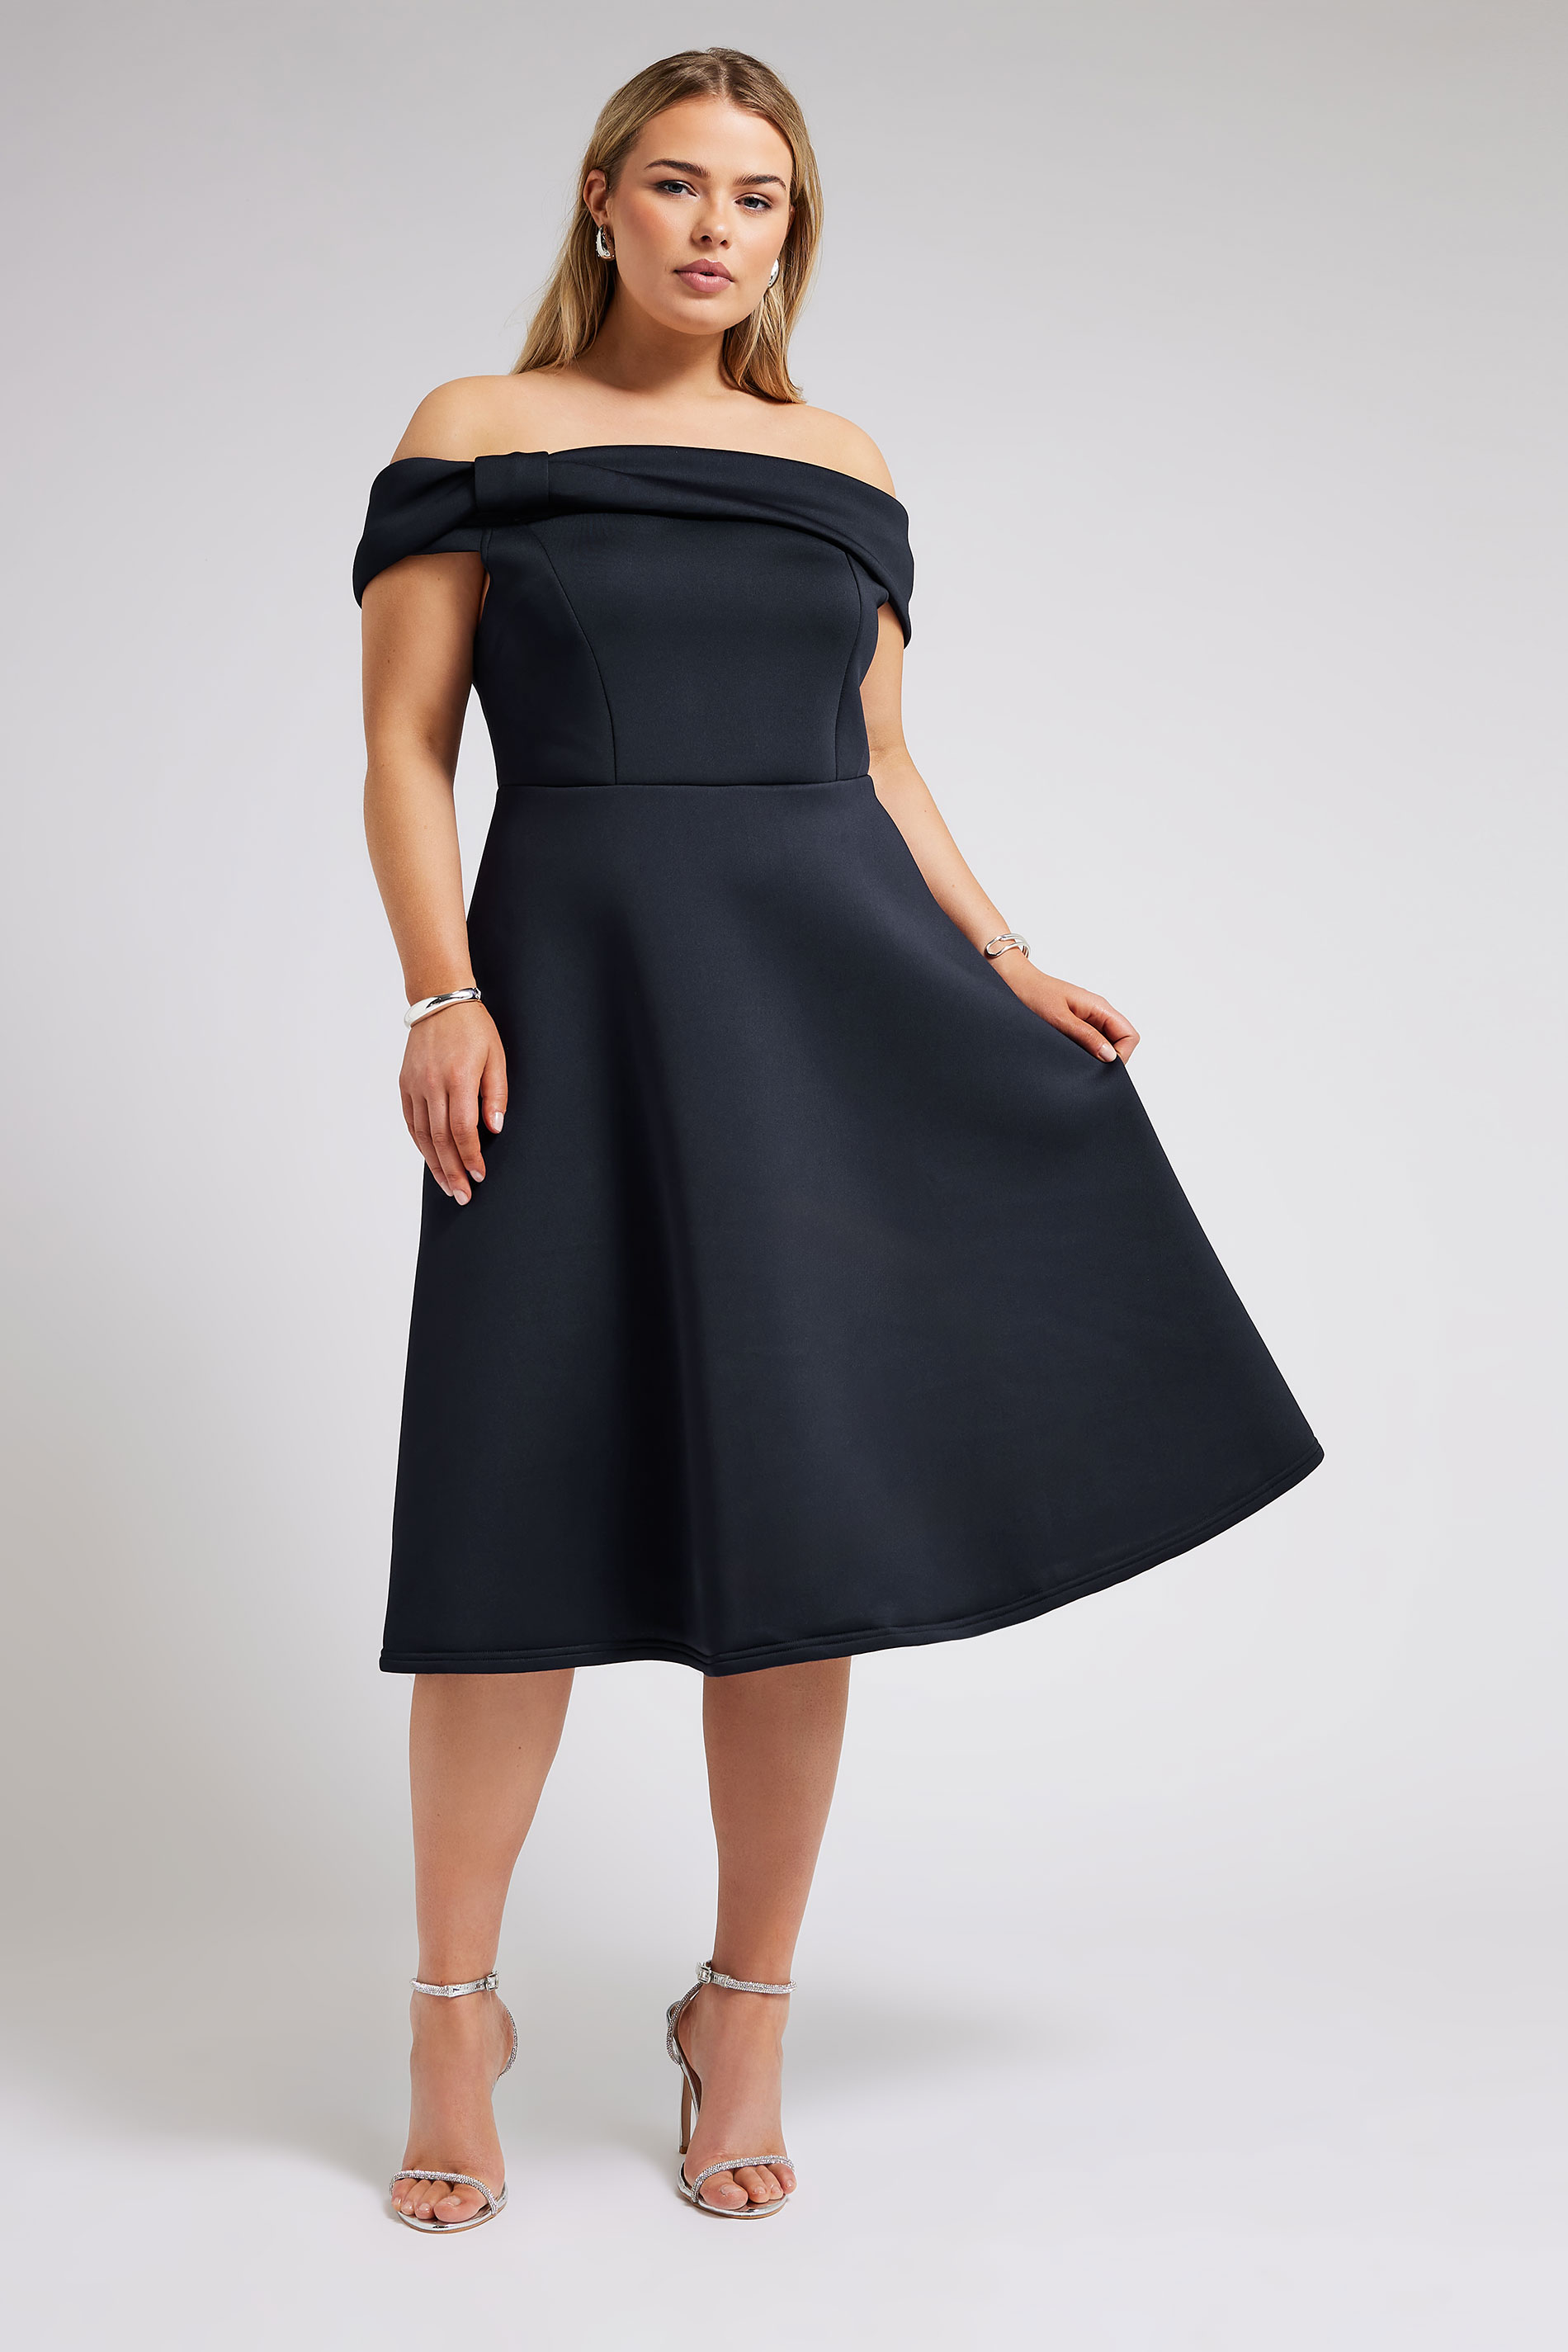 YOURS LONDON Plus Size Navy Blue Bow Bardot Skater Dress | Yours Clothing 3